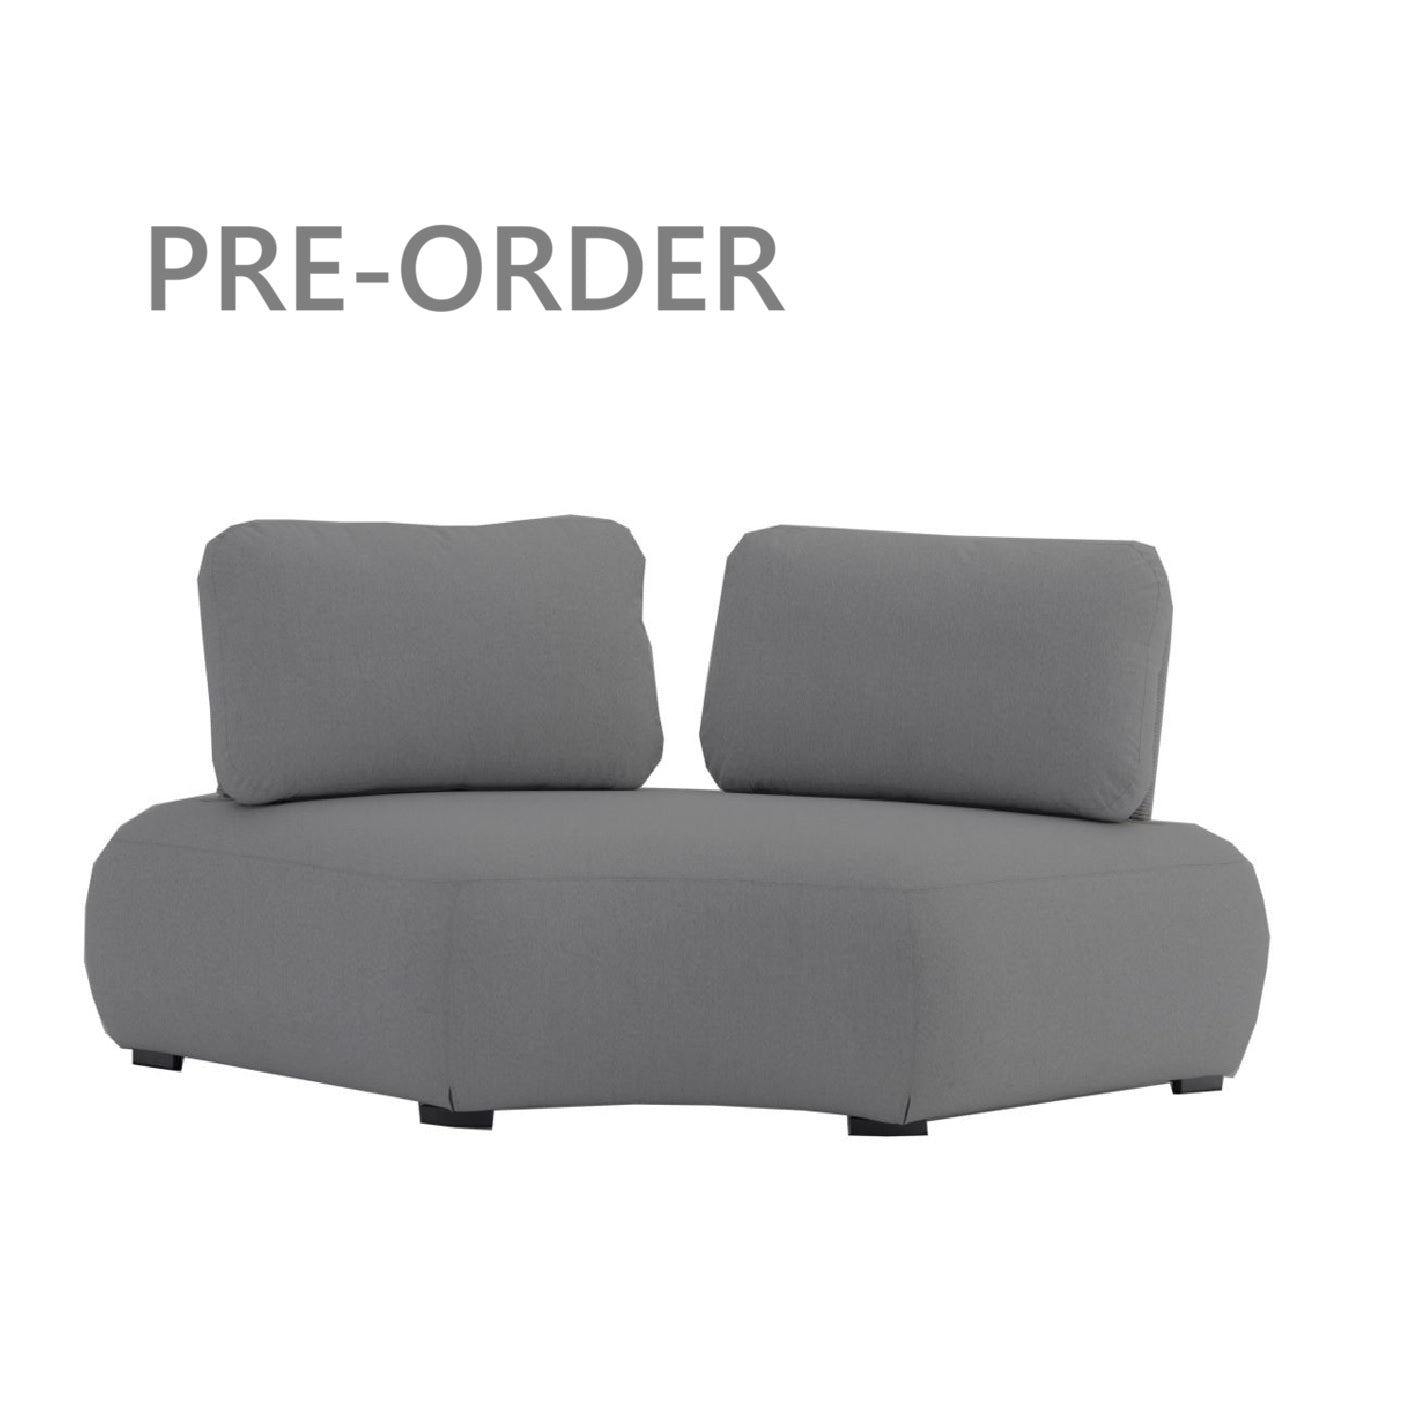 Ora Corner Seater Outdoor Lounge - Charcoal